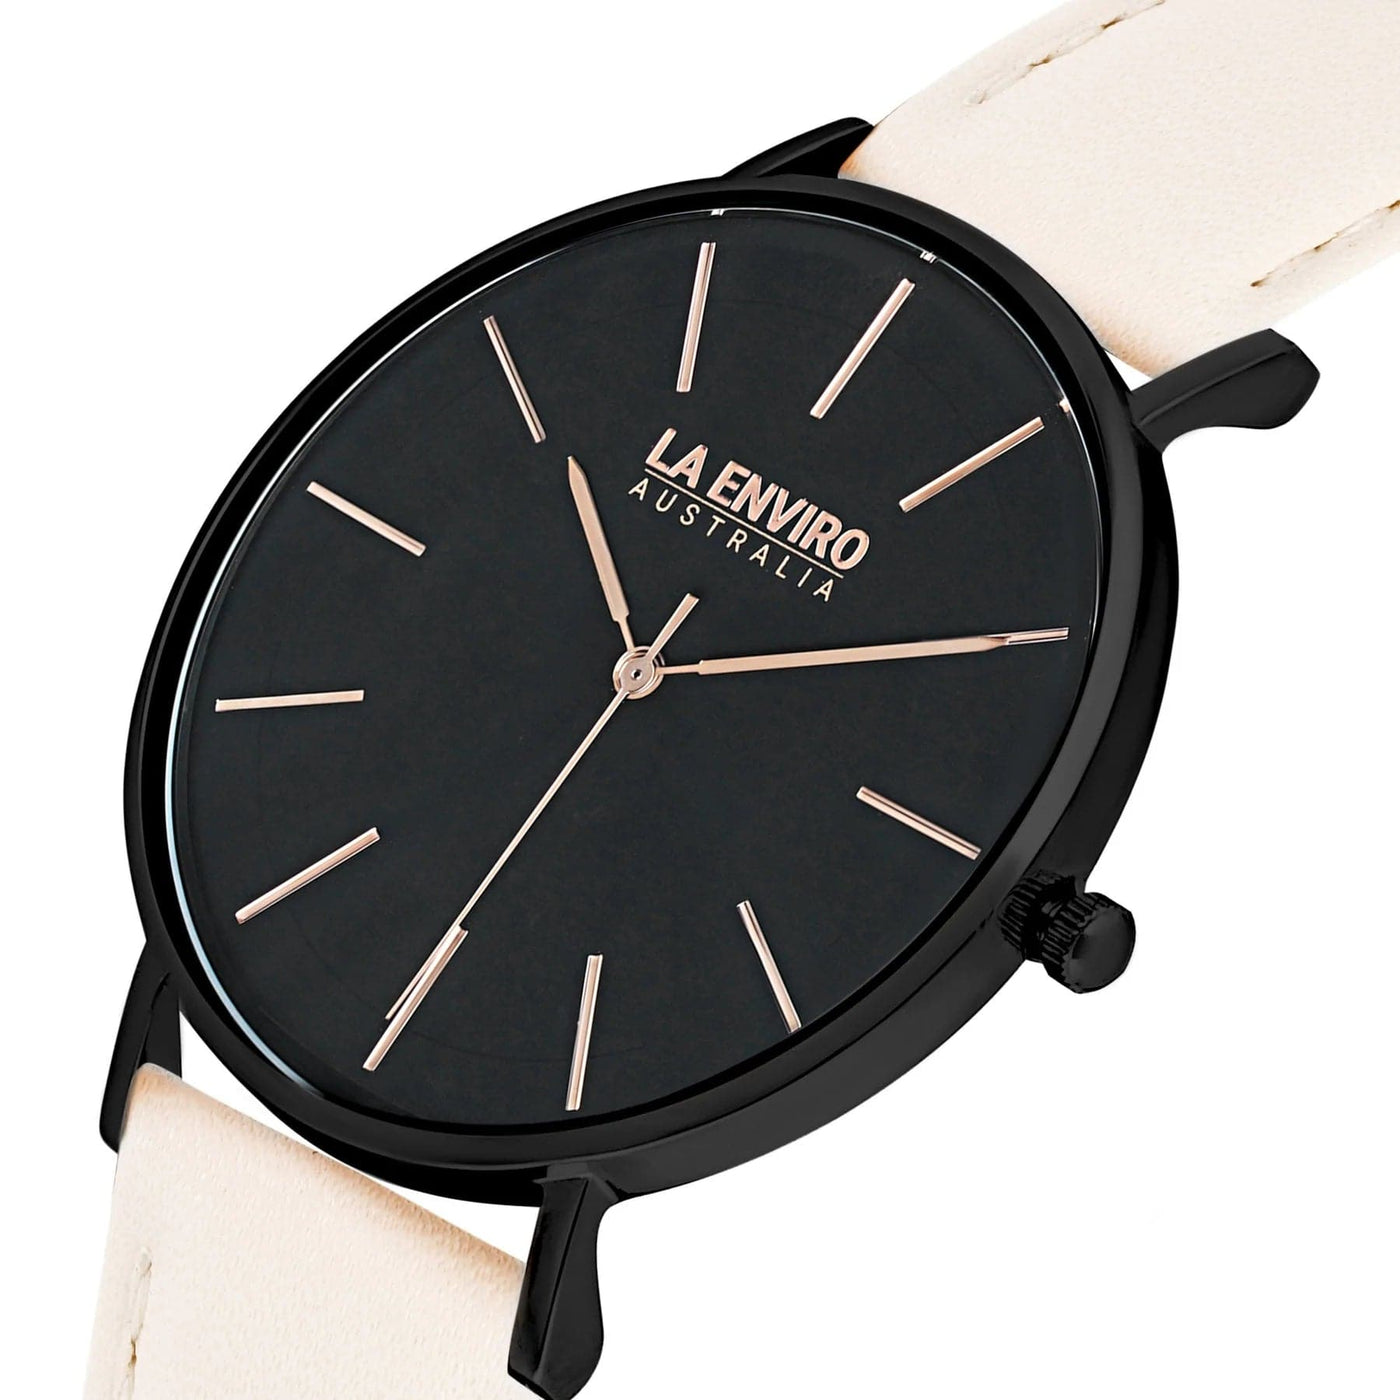 'Tierra' 40mm black watch with nude vegan-leather band and black dial by La Enviro